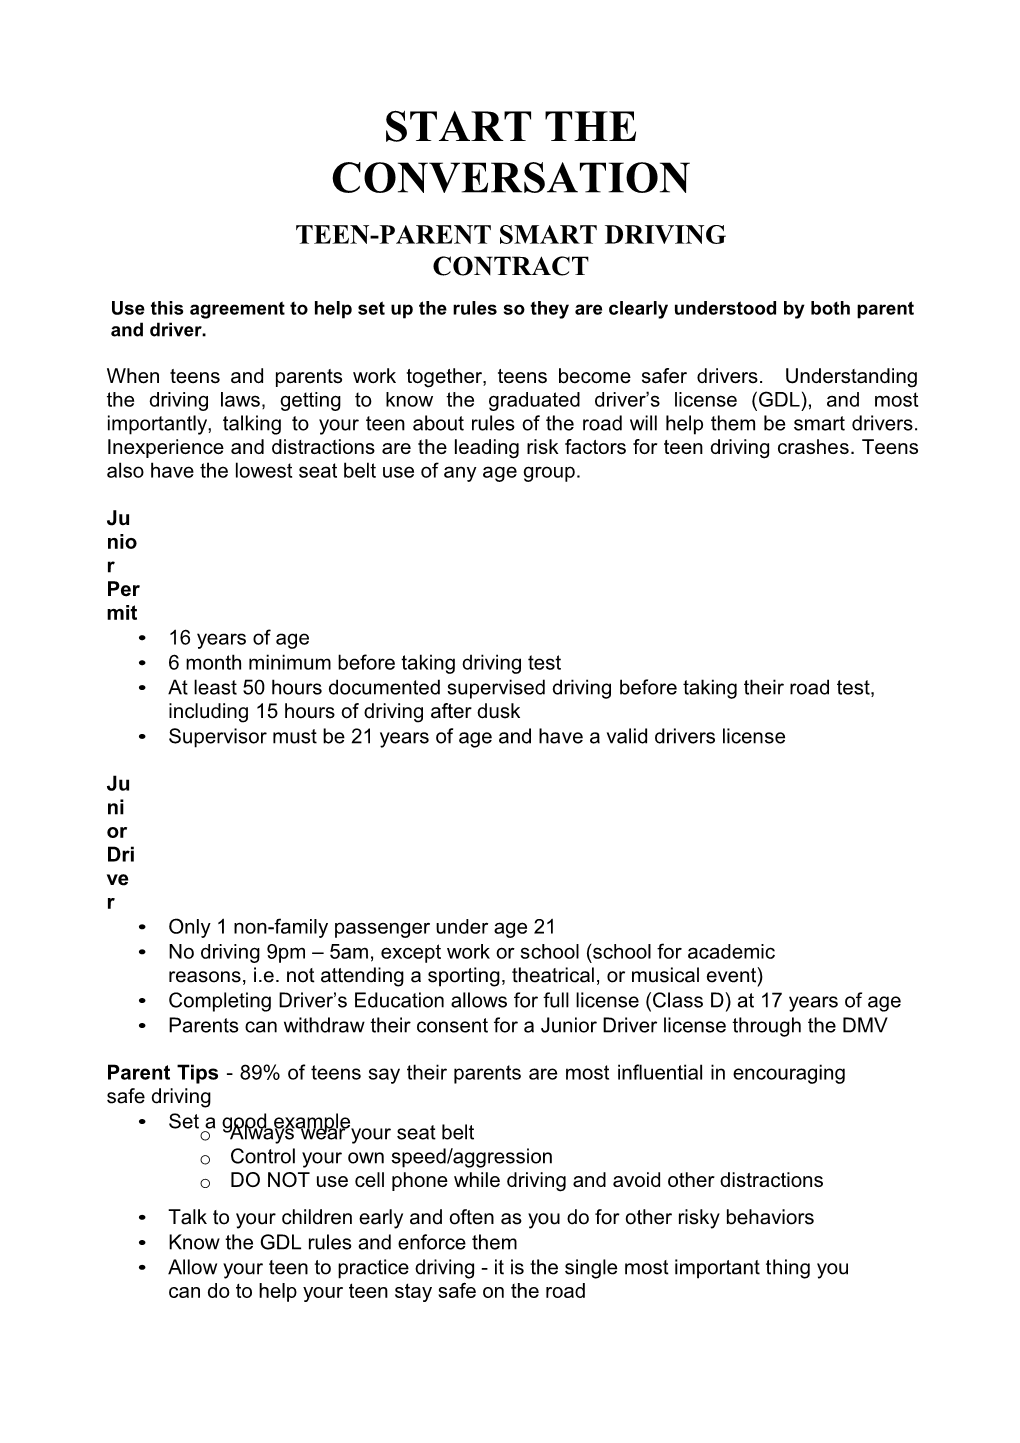 Help Your Teen Become a Smart Driver